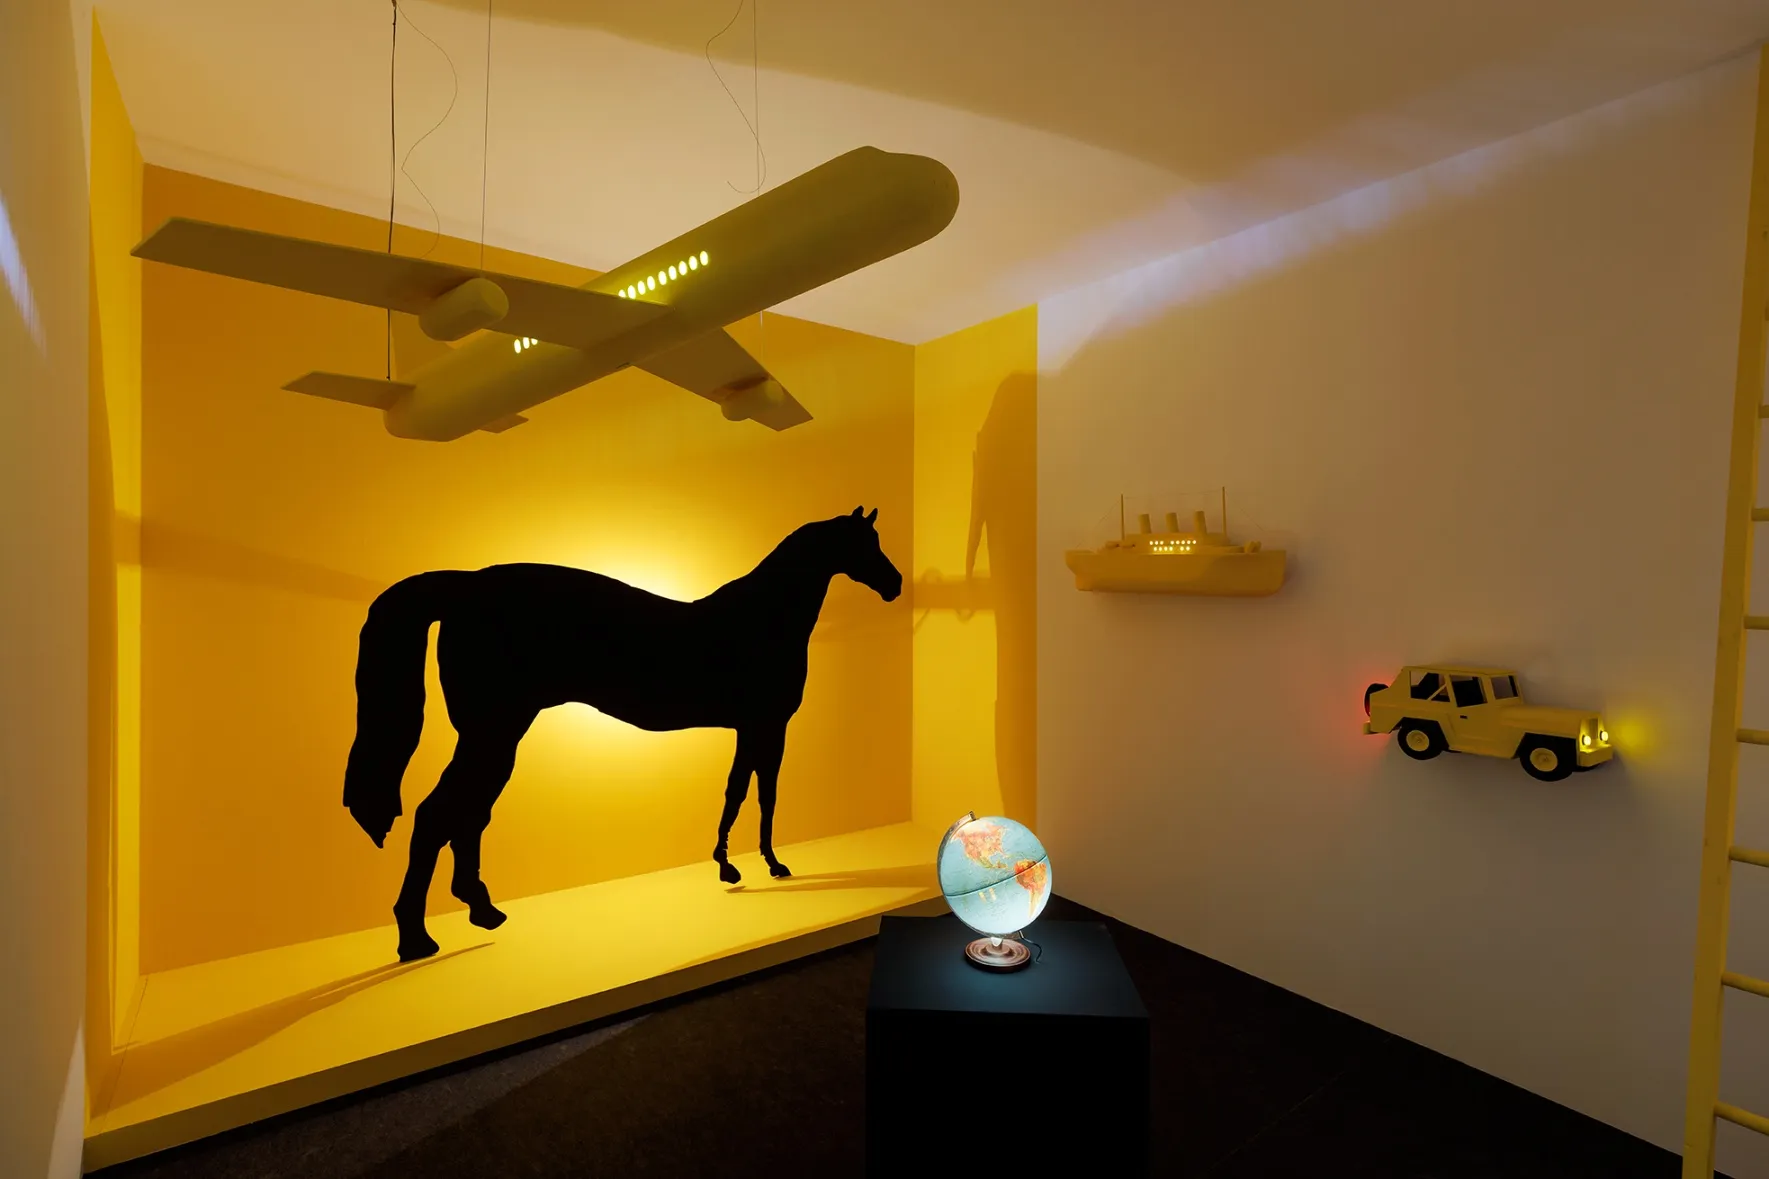 A bright yellow room with props, including a yellow airplane, a black horse silhouette, a yellow boat, and a yellow jeep. A illuminated globe is placed in the center.